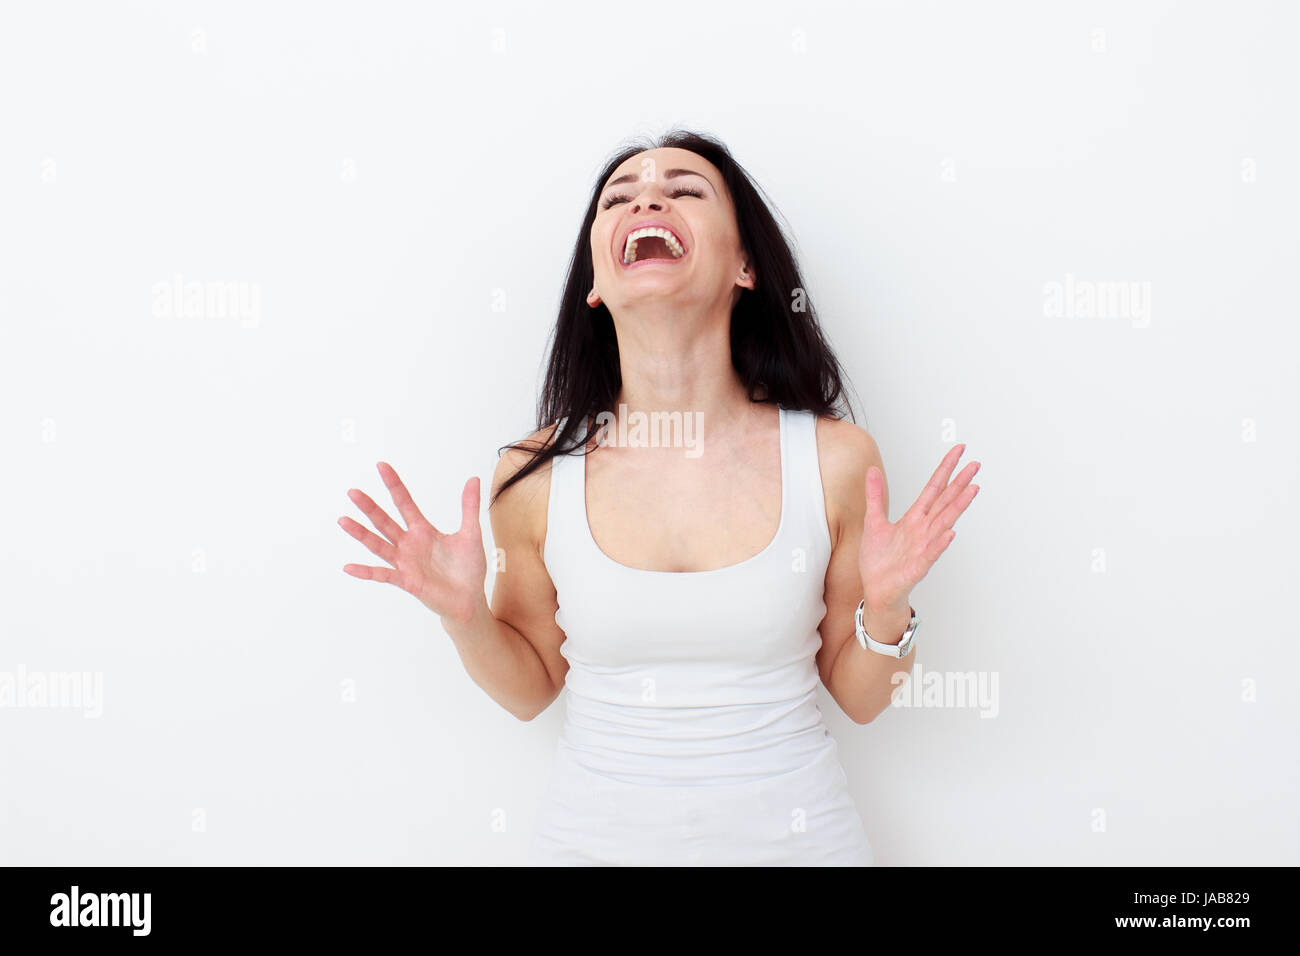 Happy woman Laughing. Closeup portrait woman smiling with perfect smile and white teeth Stock Photo